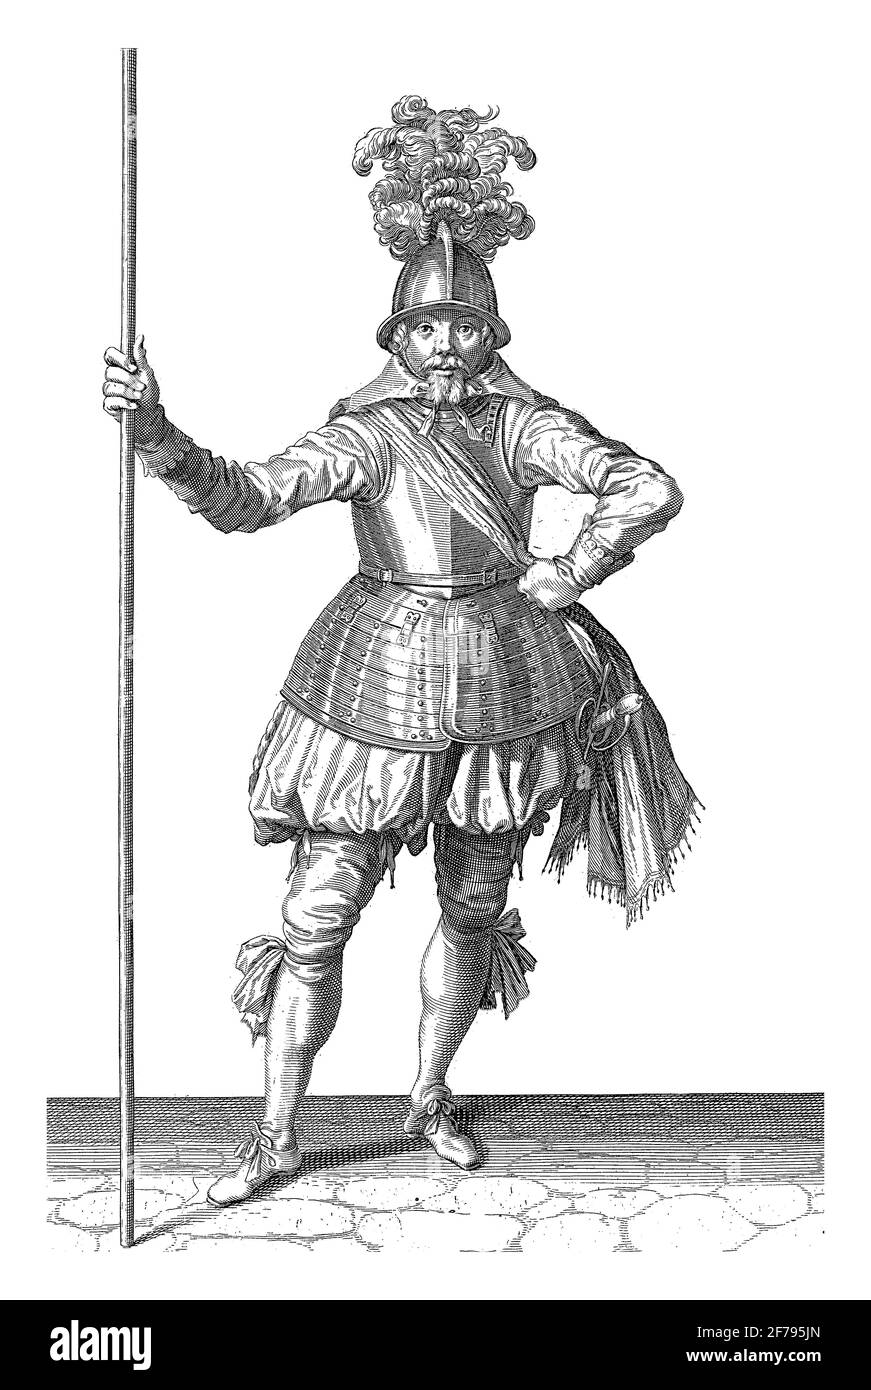 A soldier, feet, holding a skewer (lance) upright with his right hand (No. 1), c. 1600. Plate 1 in the instructions for handling the skewer, vintage e Stock Photo